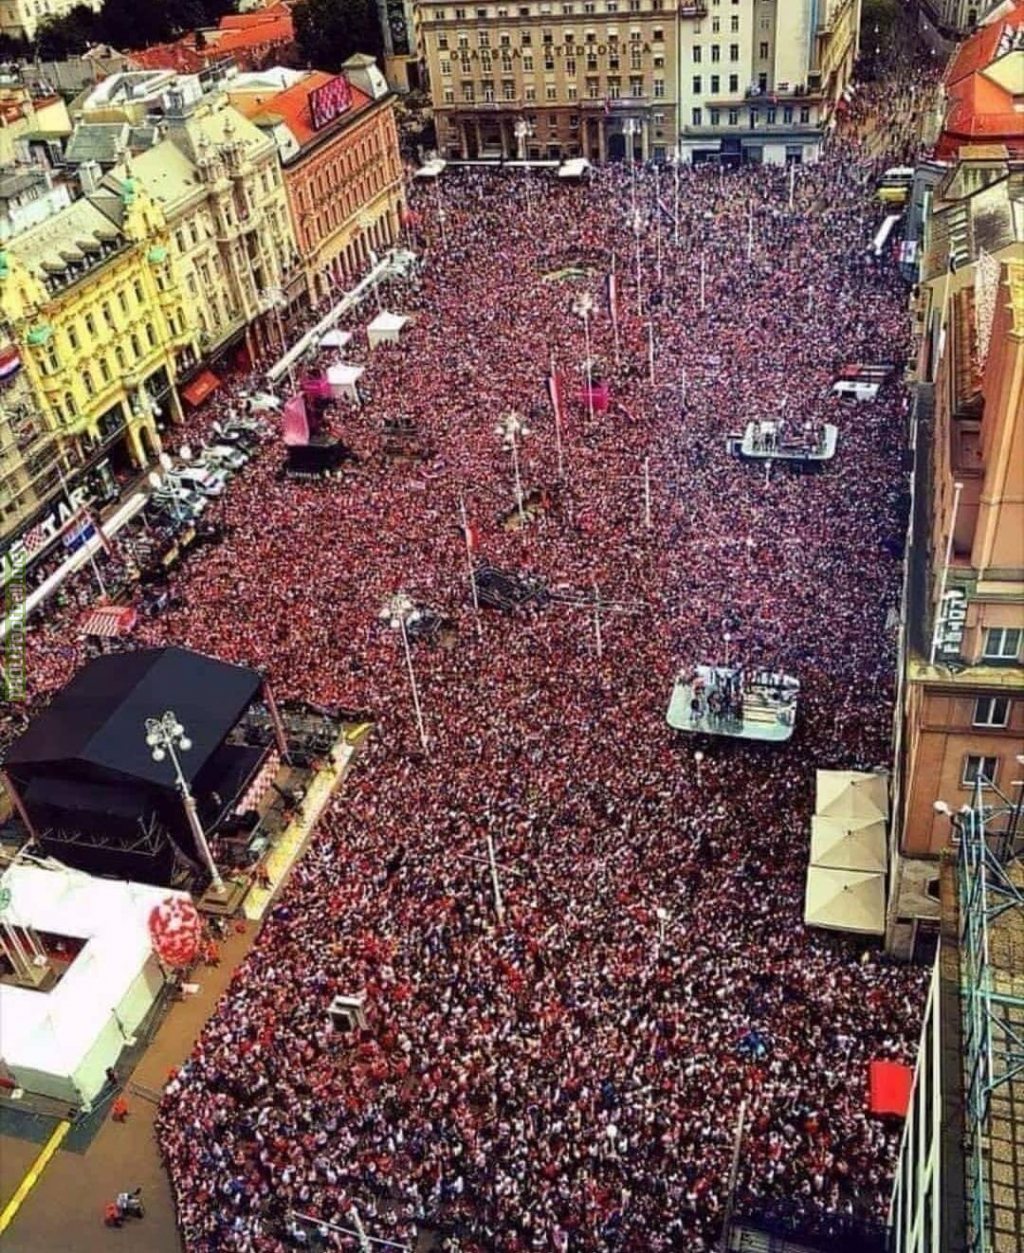 Ban Jelačić Square. More than 100000 people are waiting to celebrate Croatia's silver medal. Breathtaking!!